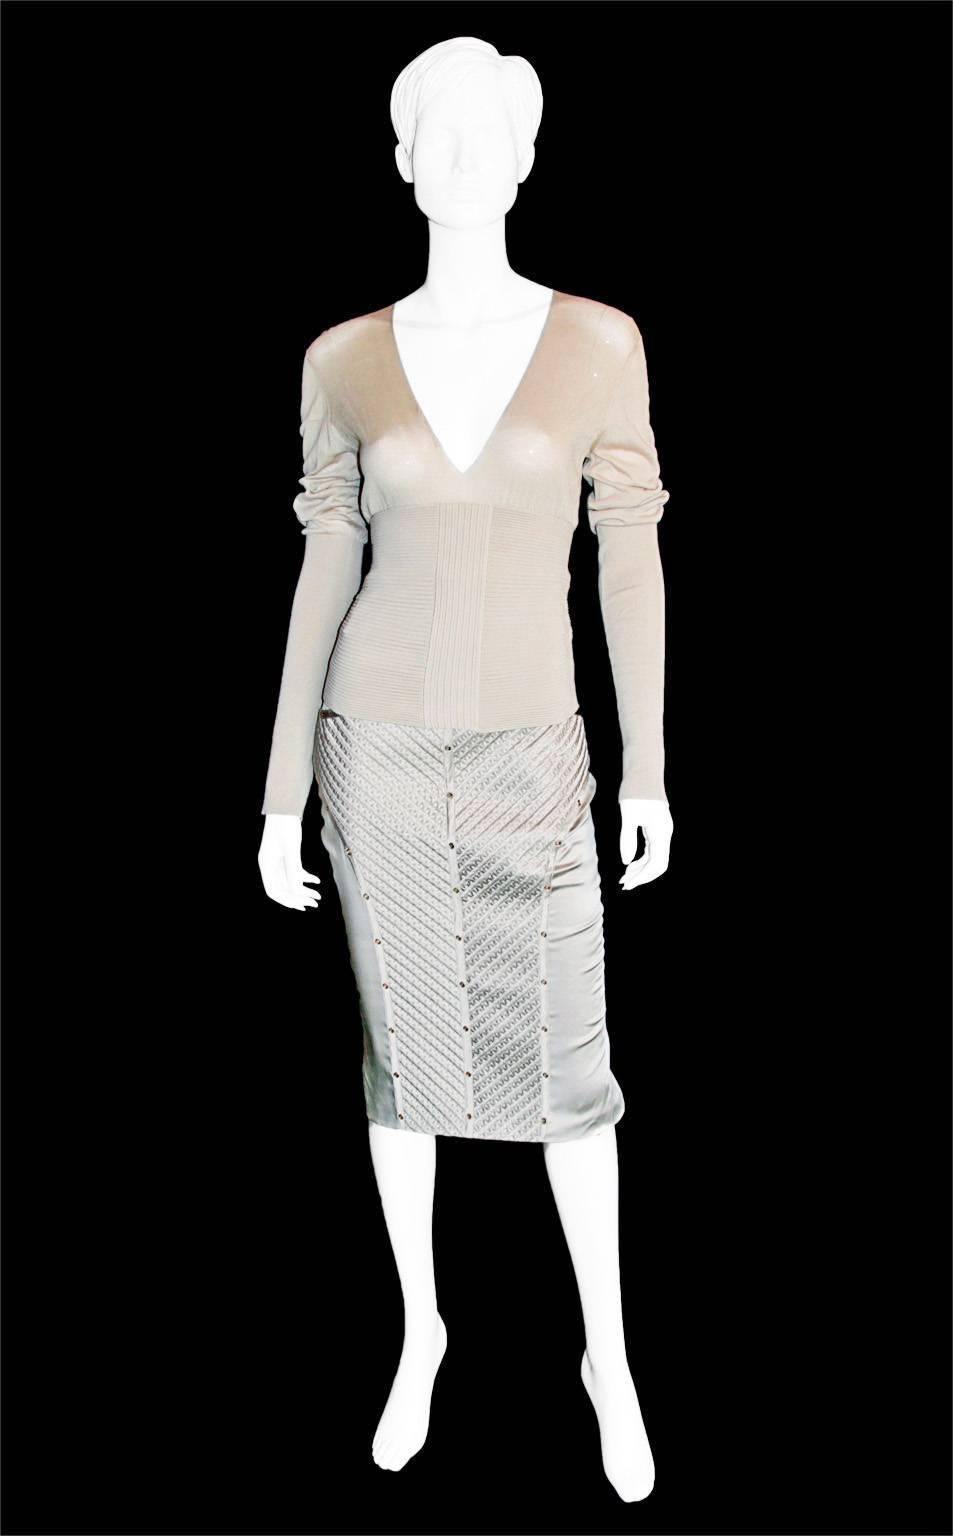 Women's Iconic Tom Ford Gucci FW03 Beige Leather Fur Corseted Jacket & Silk Runway Skirt